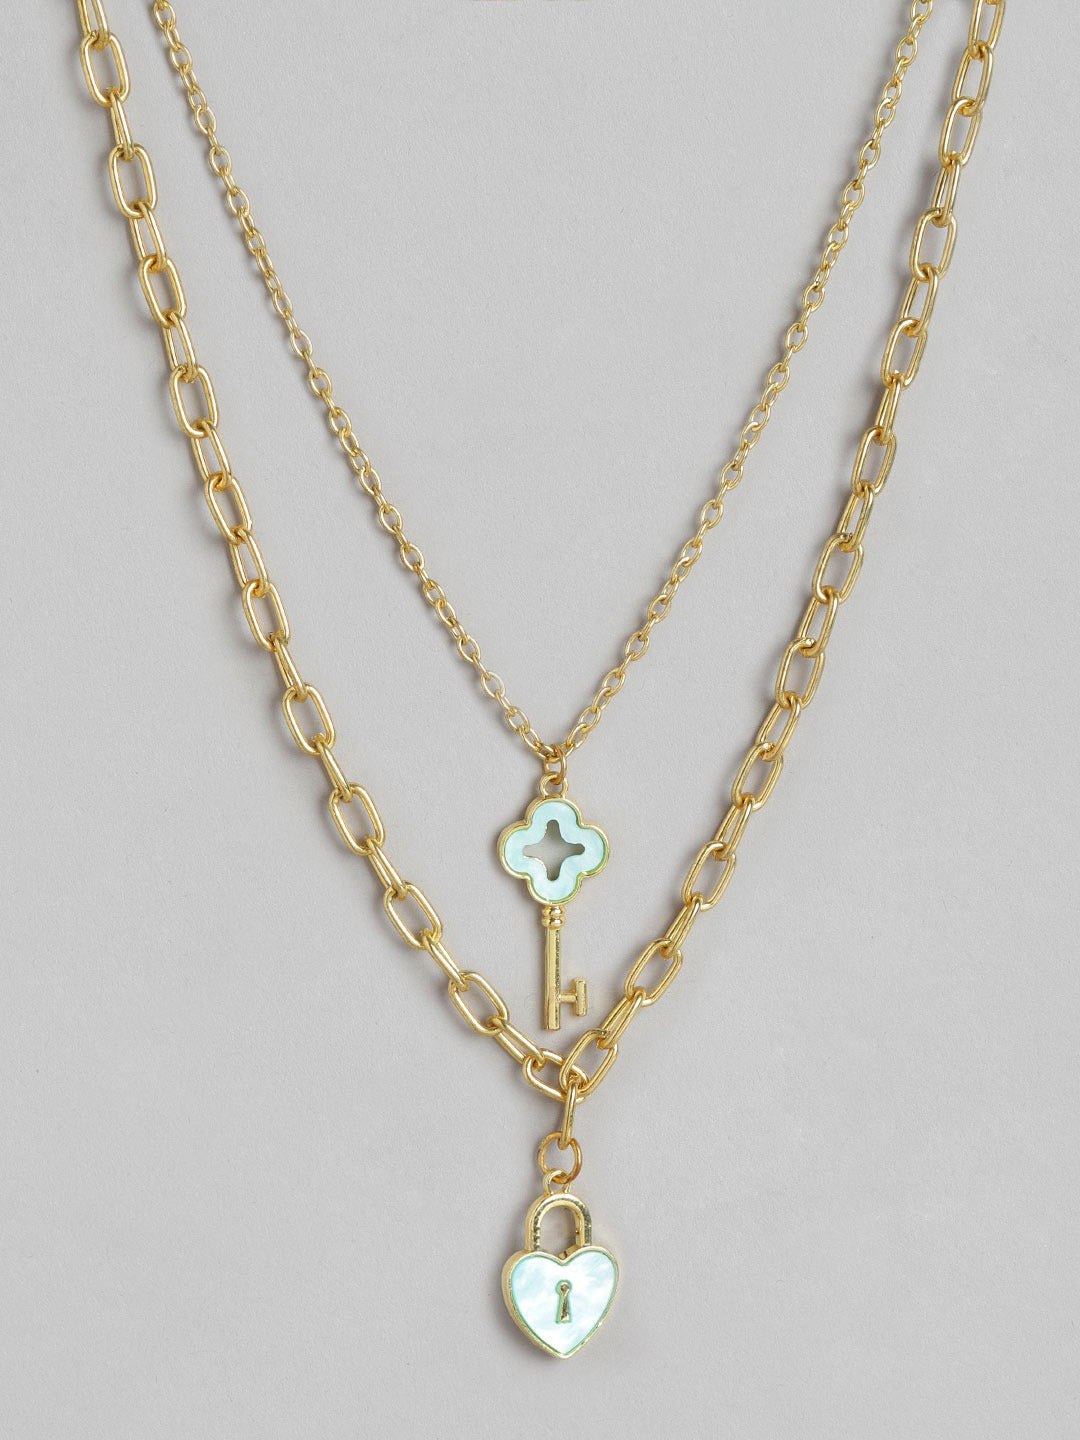 Blueberry Heart Lock and Key layered pendant detailing necklace